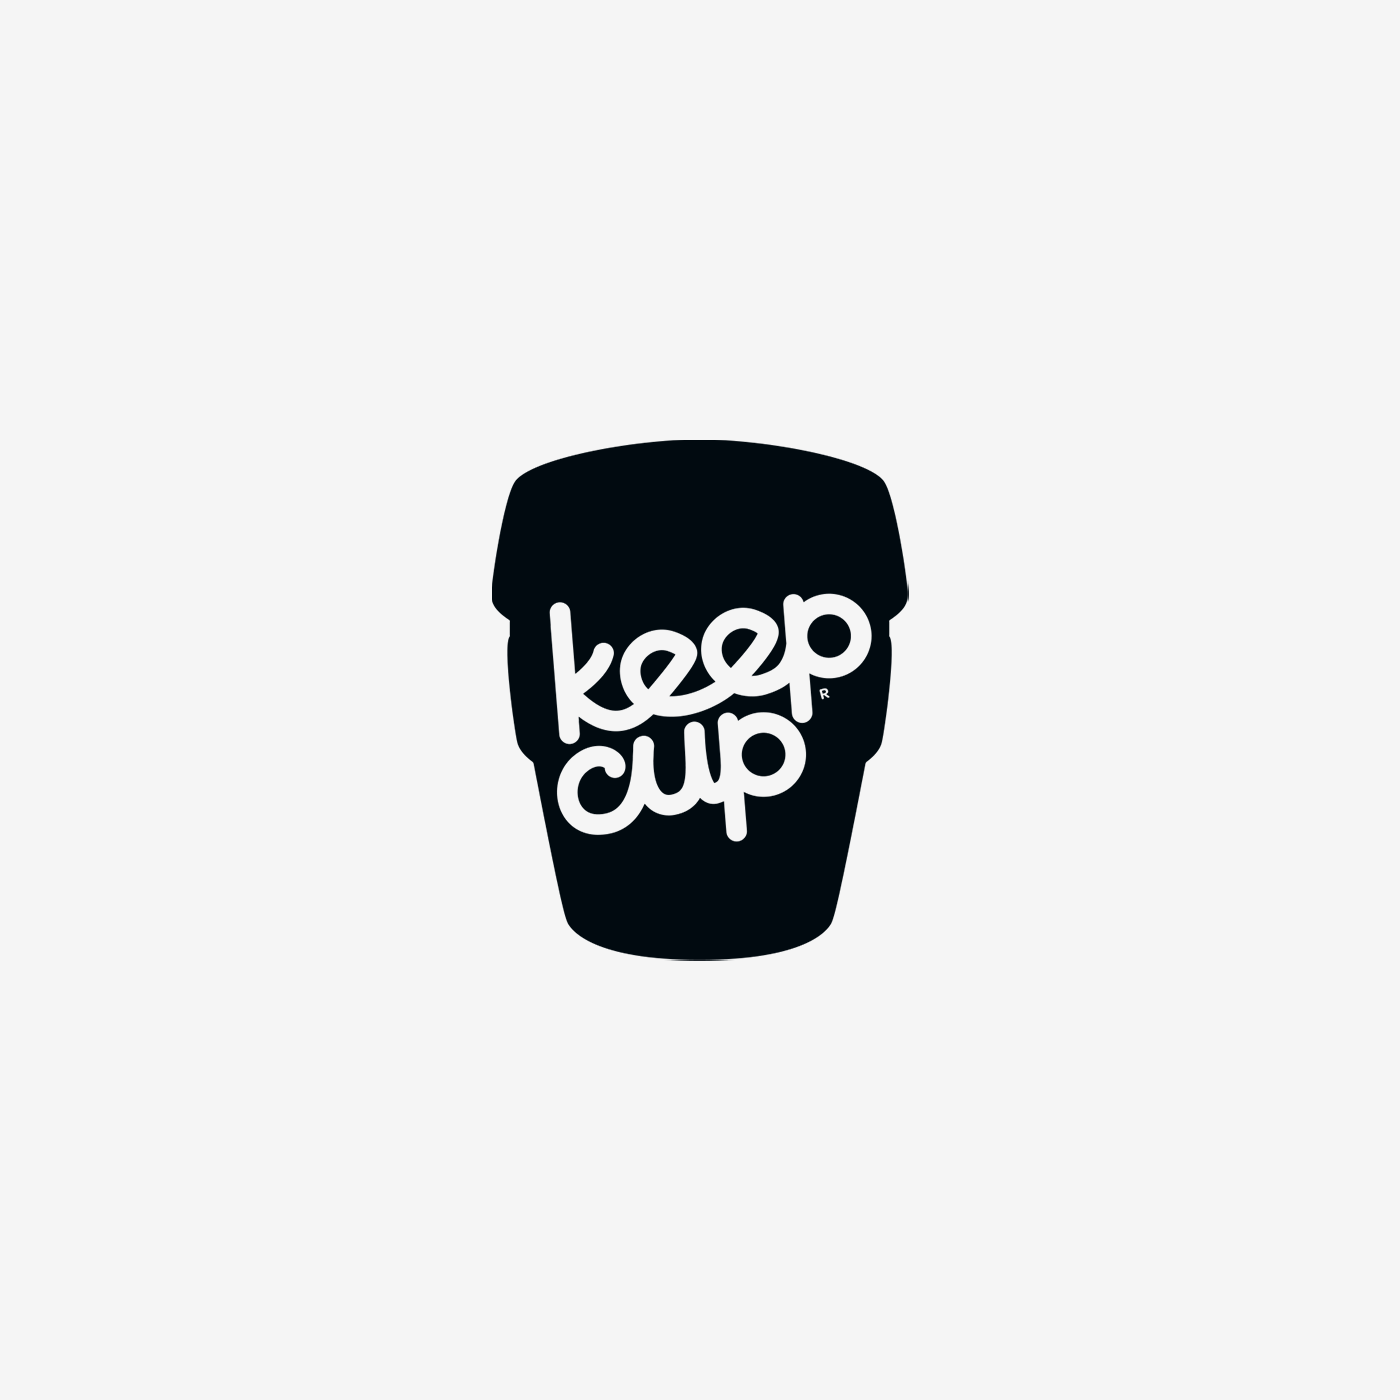 keep cup logo_Web_Ready.png